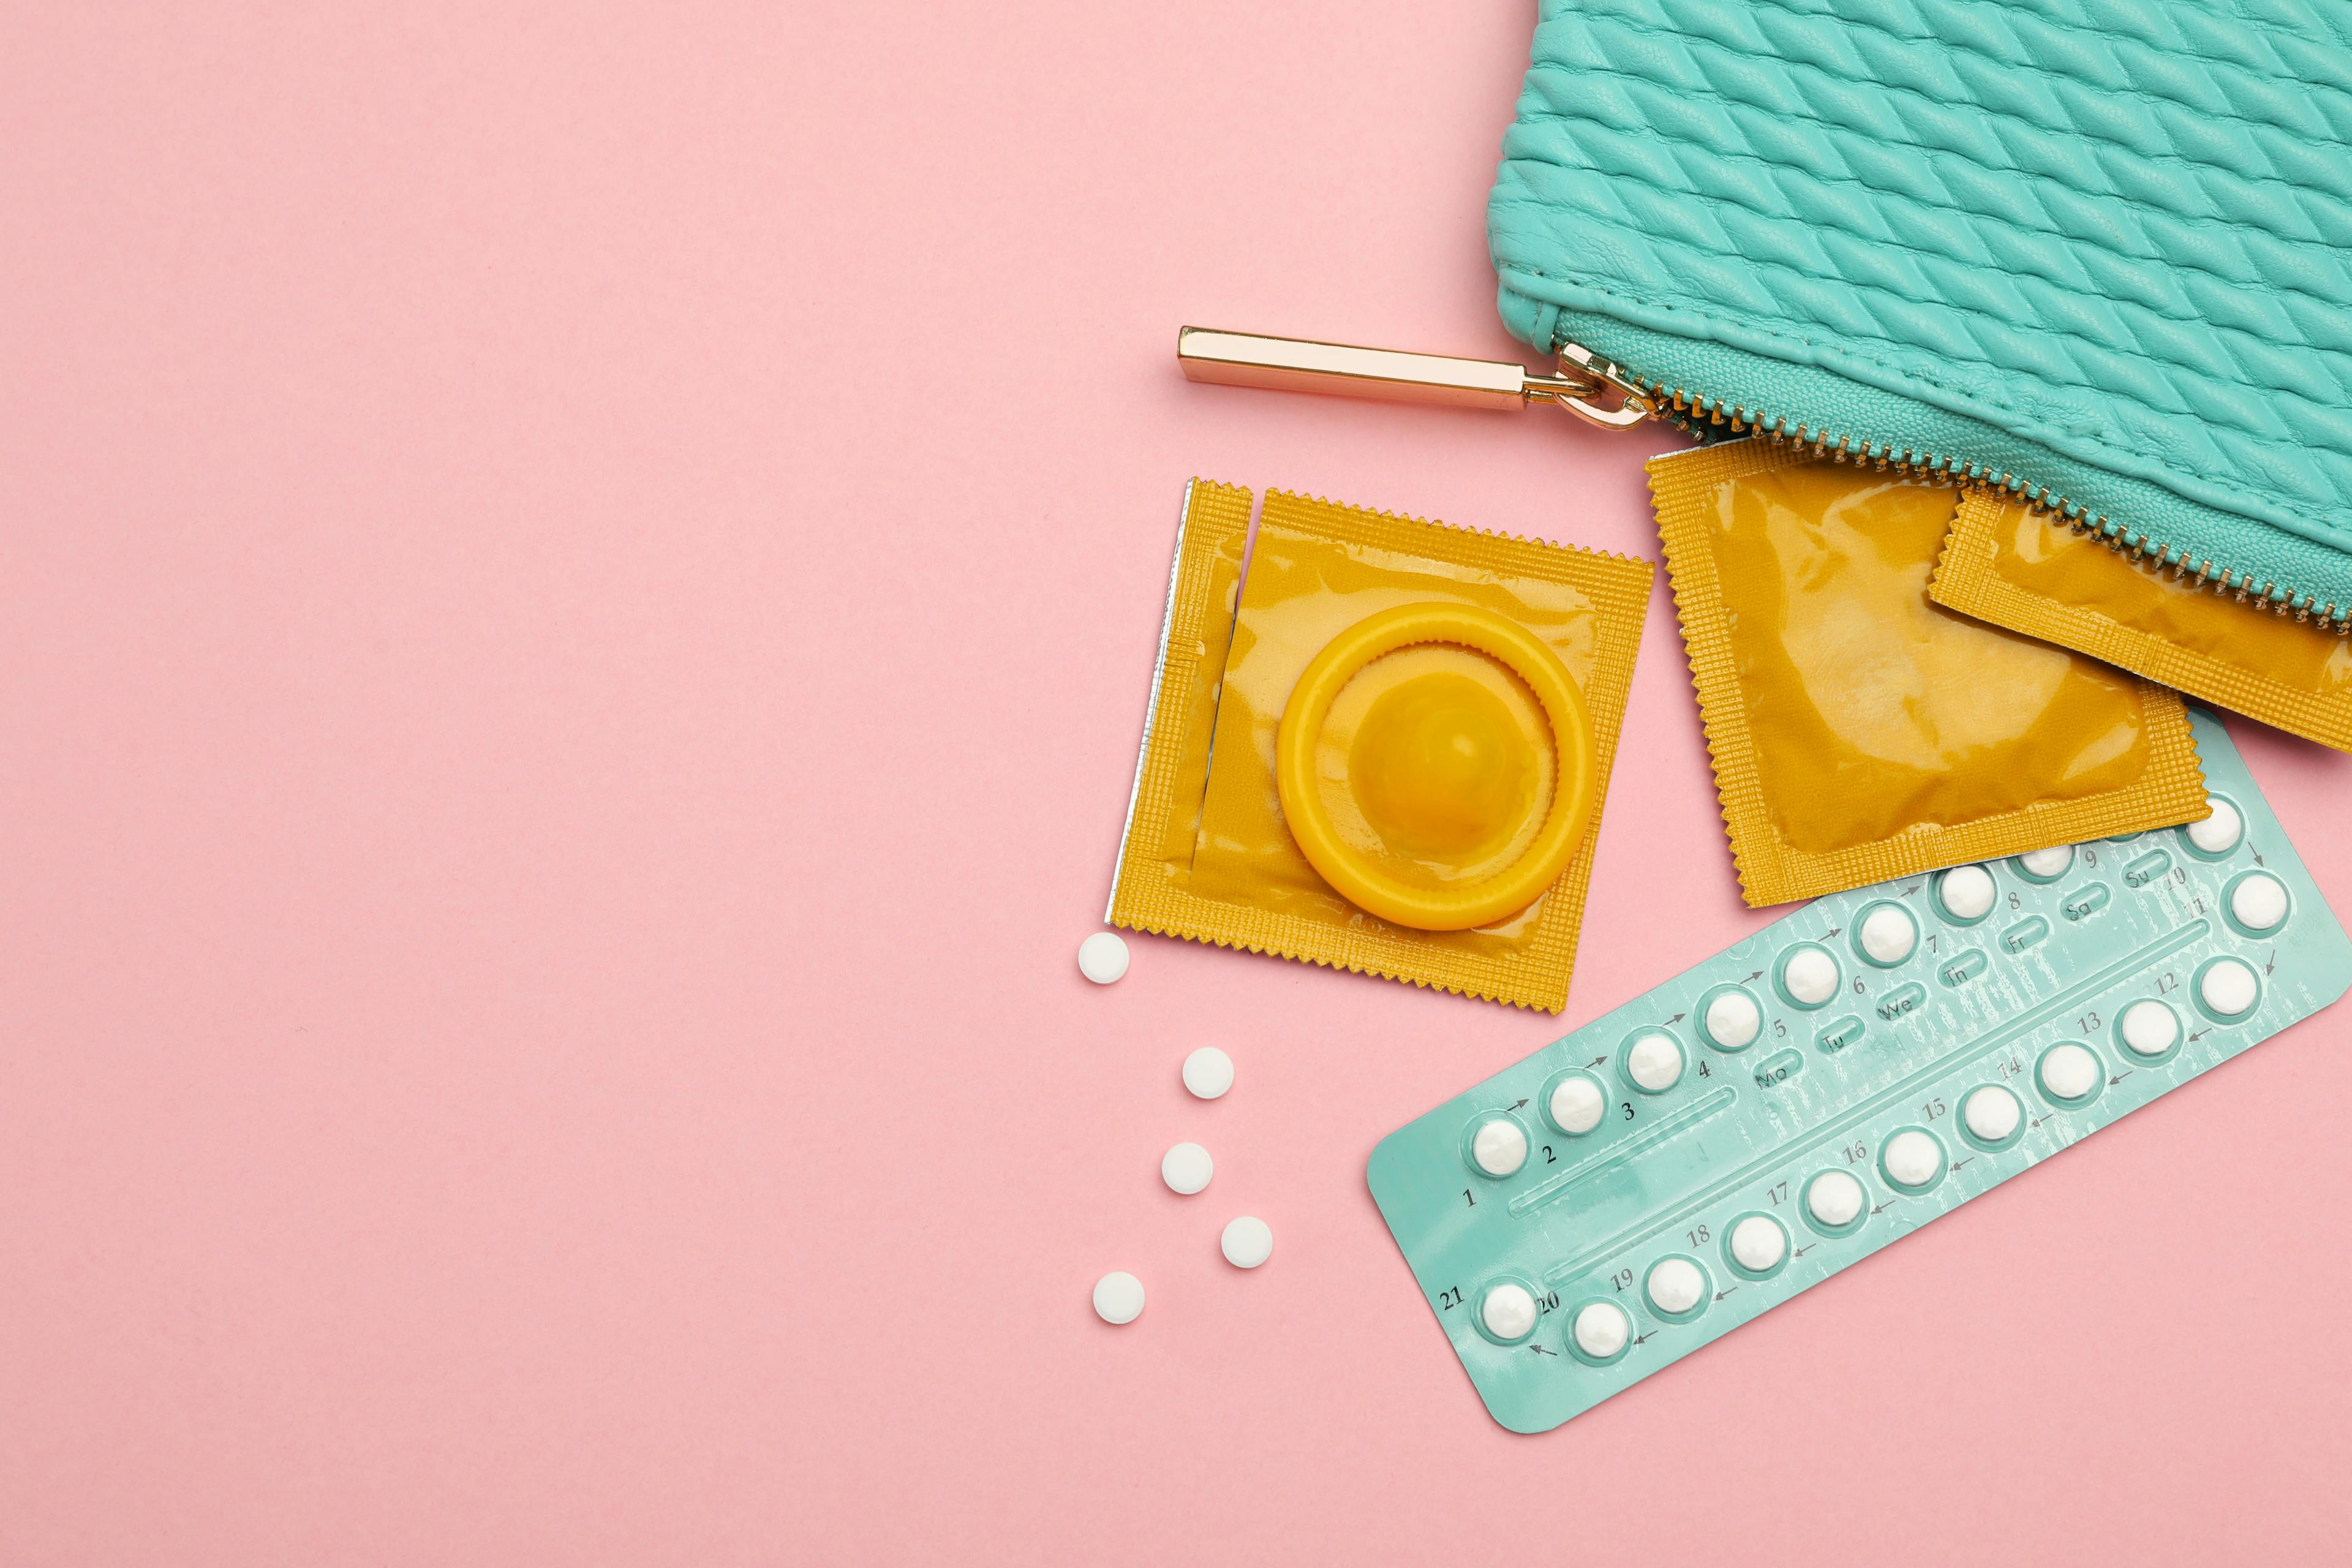 Condoms and birth control pills in purse on pink background, top view with space for text. Safe sex - Image credit: New Africa | stock.adobe.com